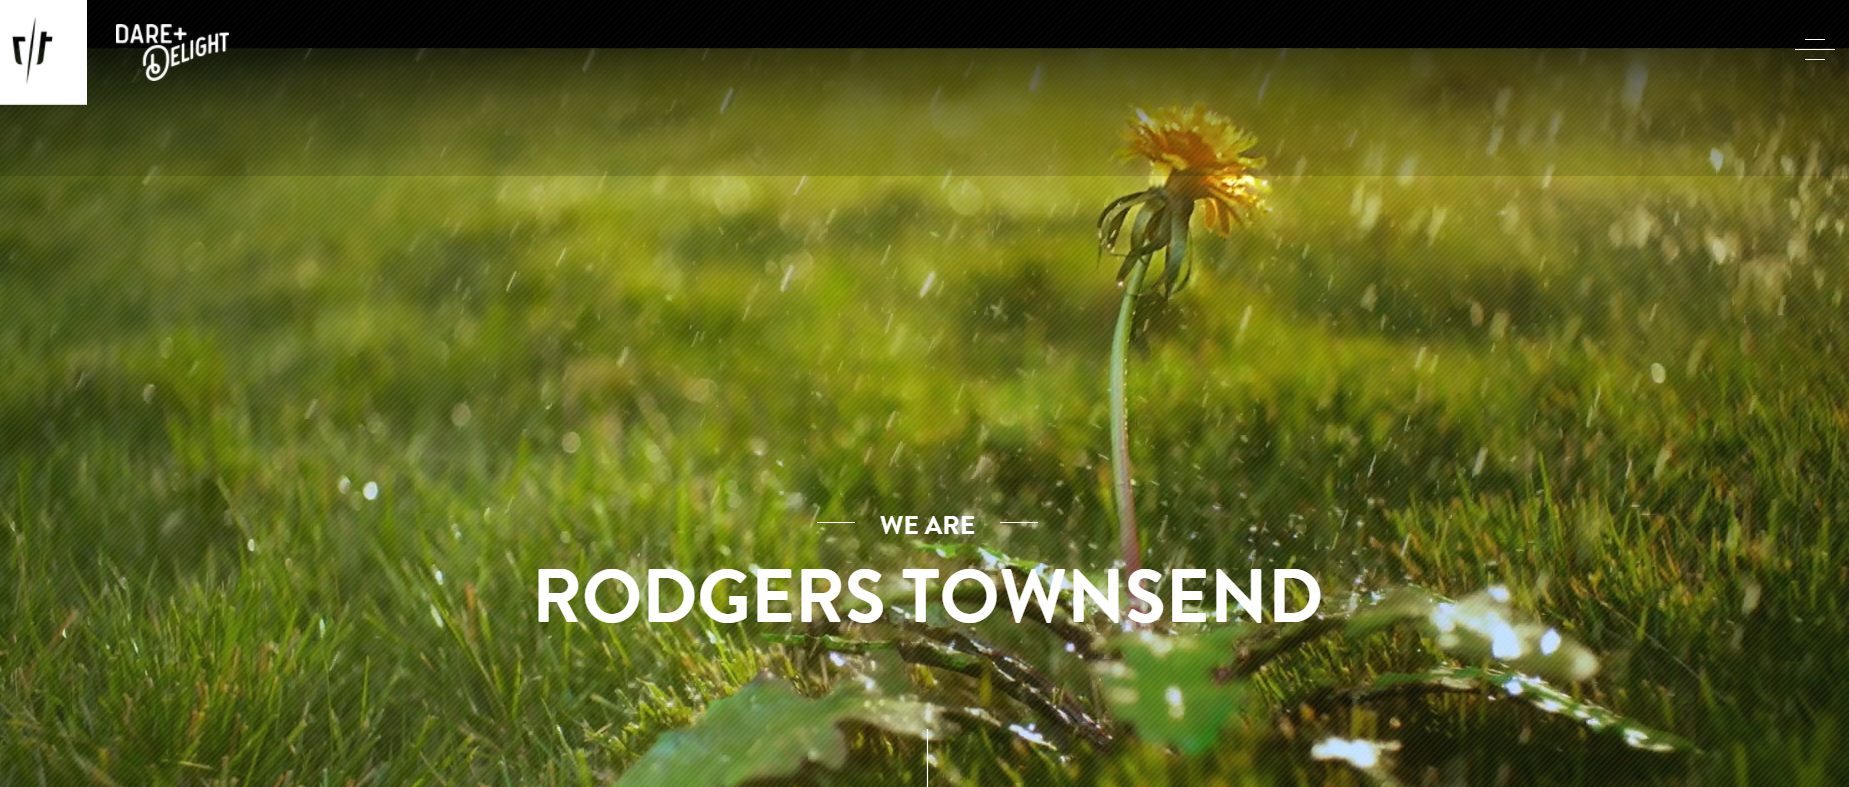 Rodgers Townsend